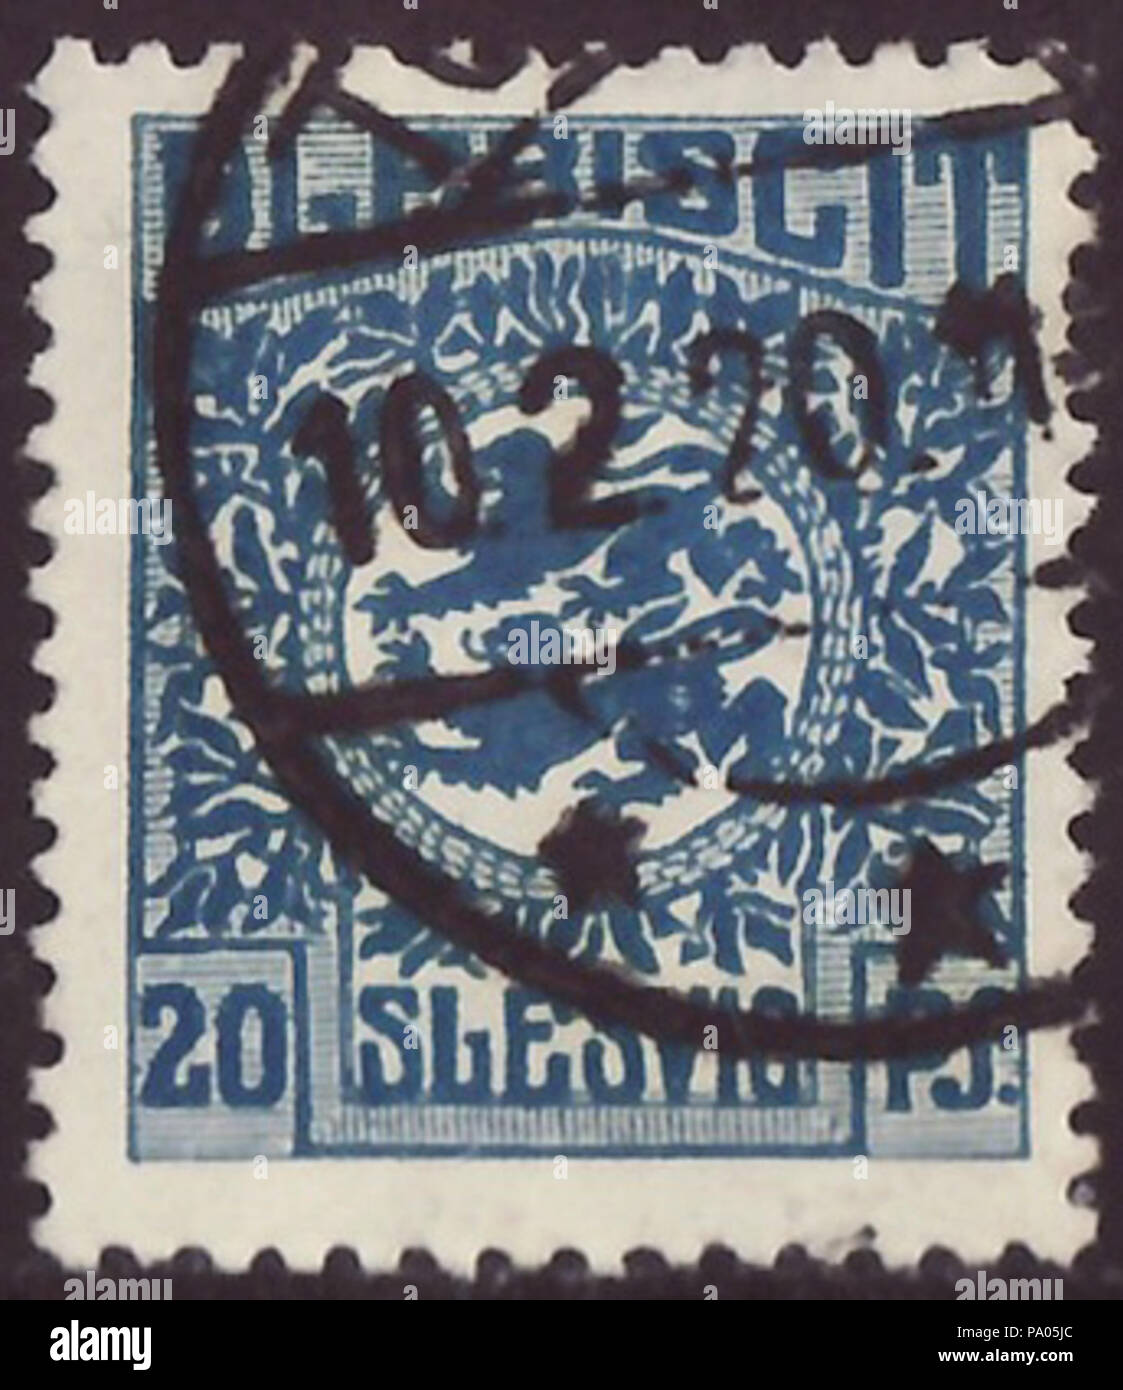 . Stamp of the German Empire - plebiscite area 'Schleswig'; definitive stamp of 1920 Stamp: Michel: No. 6; AFA: No. 20 (DR-SL) Color: dark grey ultramarine to blue Watermark: Schleswig No. 1 (standing crosses) Nominal value: 20 Pf. (Pfennig) Postage validity: from 25 January 1920 until 27 May 1920 (Zone 1) from 25 January 1920 until 23 June 1920 (Zone 2) Postmark: Tønder, 10 February 1920 (contemporary Denmark) . 25 January 1920 (first issue day of the stamp) 10 February 1920 (date of postmark) 590 DRAbstG 1920 Schleswig MiNr06 B002 Stock Photo